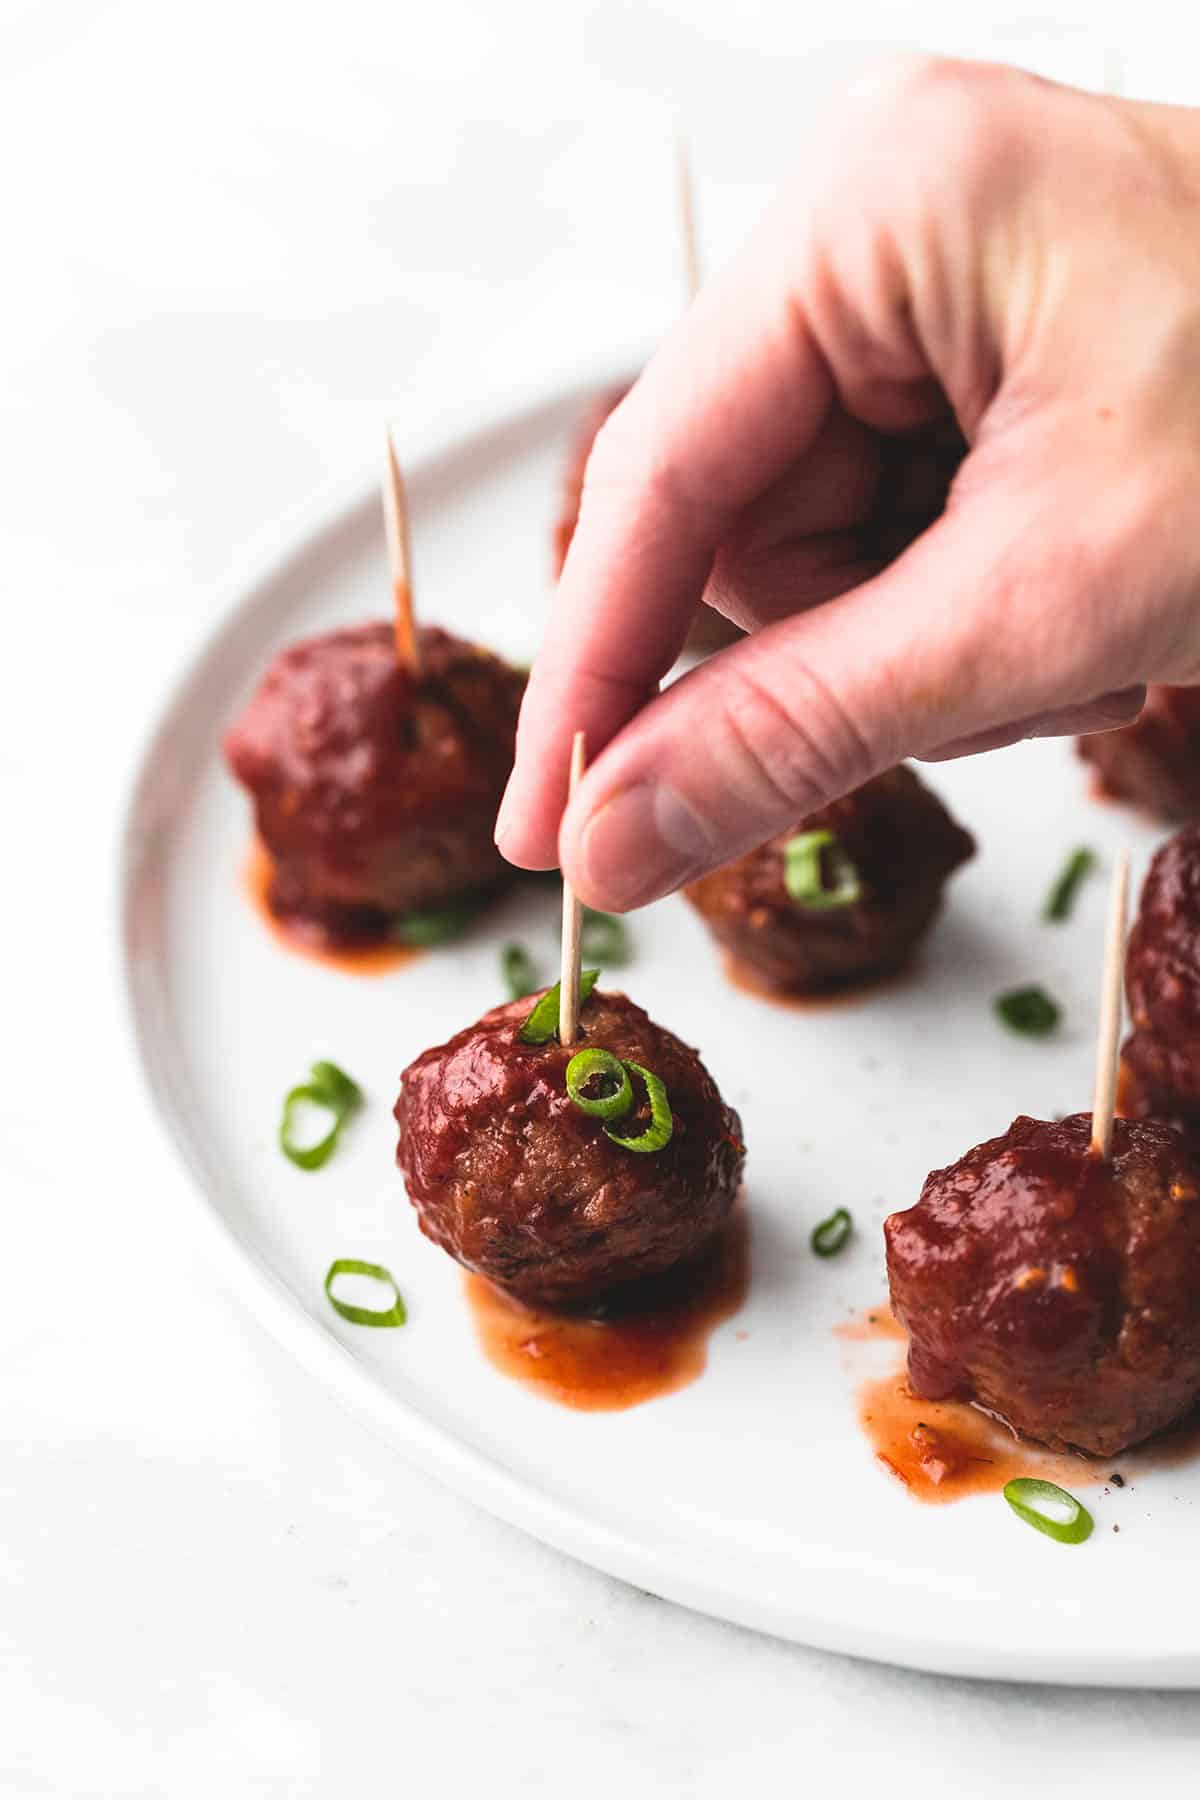 a hand picking up a slow cooker party meatball from a plate of meatballs with toothpicks in them.